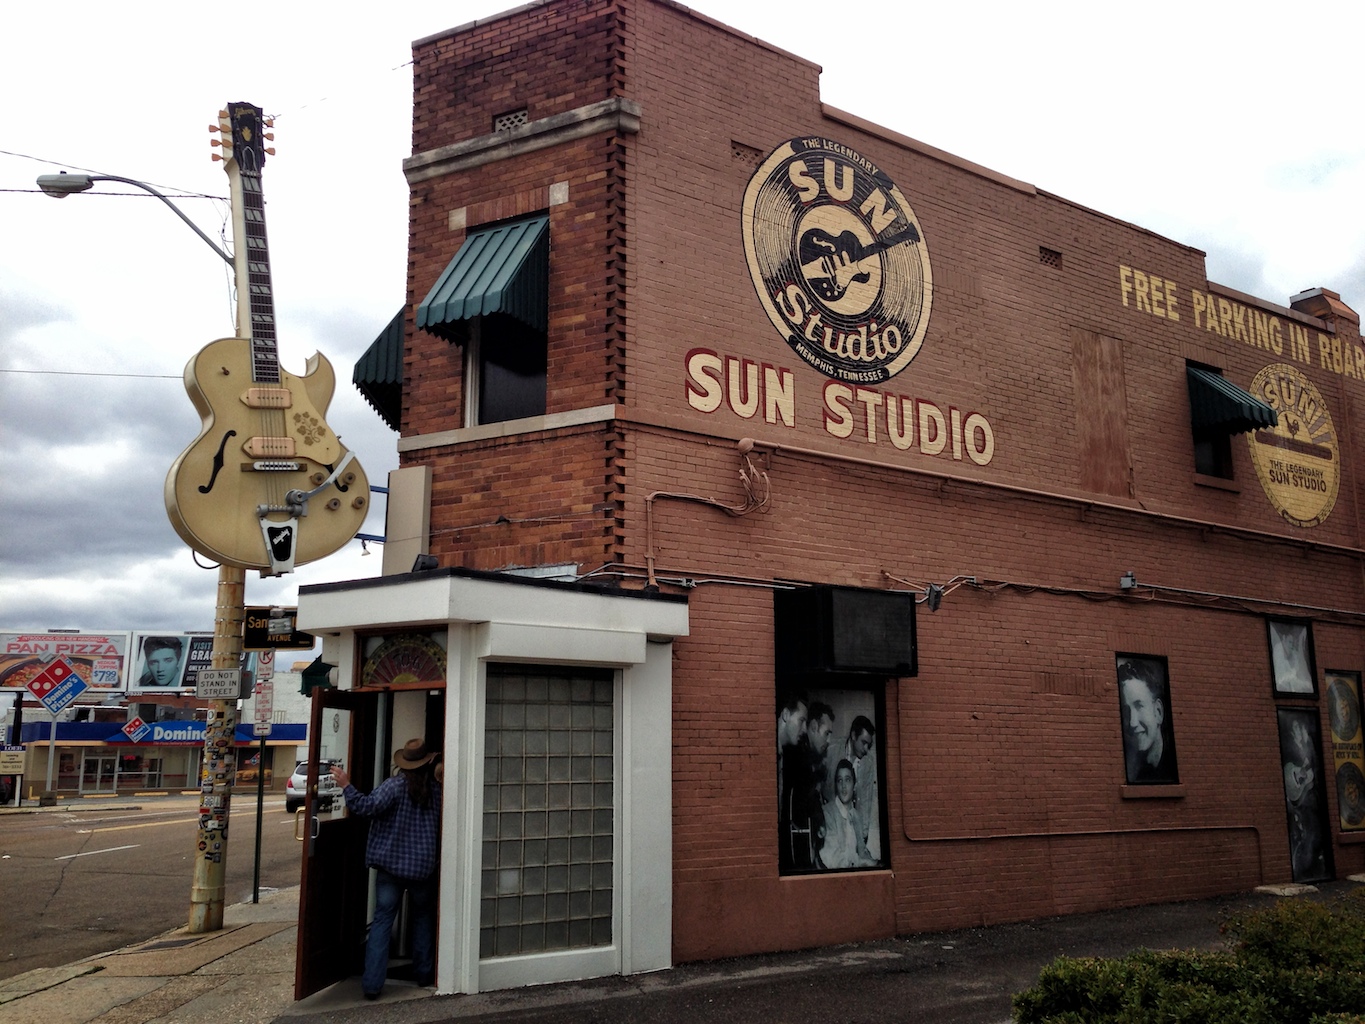 The legendary Sun Recording Studio in Memphis, Tennessee, was established by Sam Phillips in 1952. It was here that he discovered and/or recorded many of the greatest names in rock and roll, including: B.B. King, Howlin' Wolf, Ike Turner, Rufus Thomas, Elvis Presley, Johnny Cash, Jerry Lee Lewis, Carl Perkins, Charlie Rich, and Roy Orbison. Rock and roll was deeply influenced by Phillips' work, and its advent drove profound changes in American music, society, and race relations.